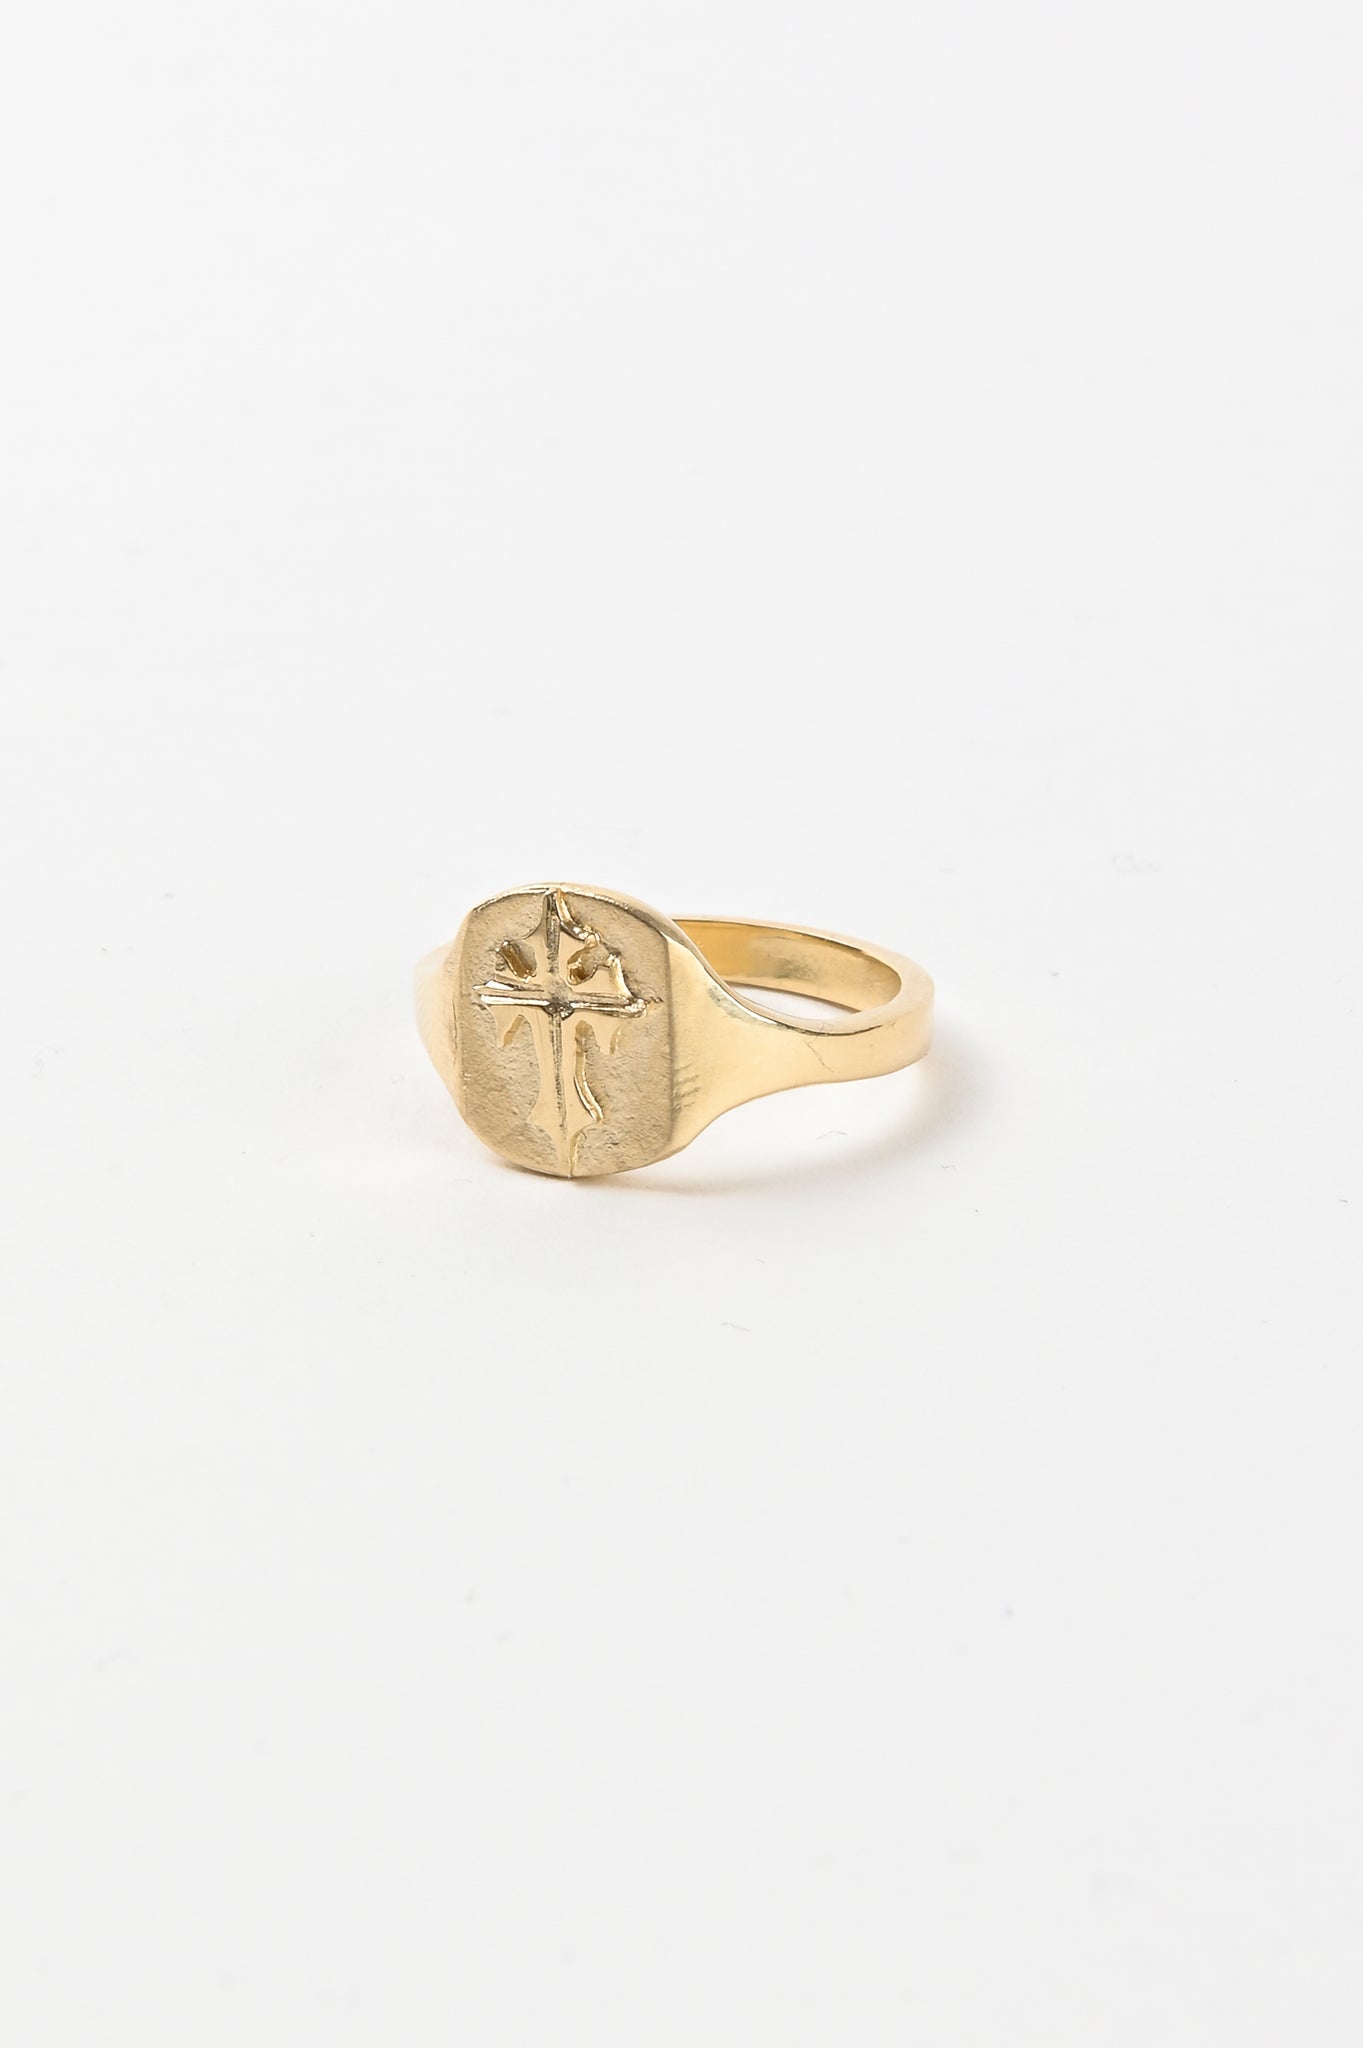 Oliver Thomas 'Hallowed' Signet Ring In 9ct Gold